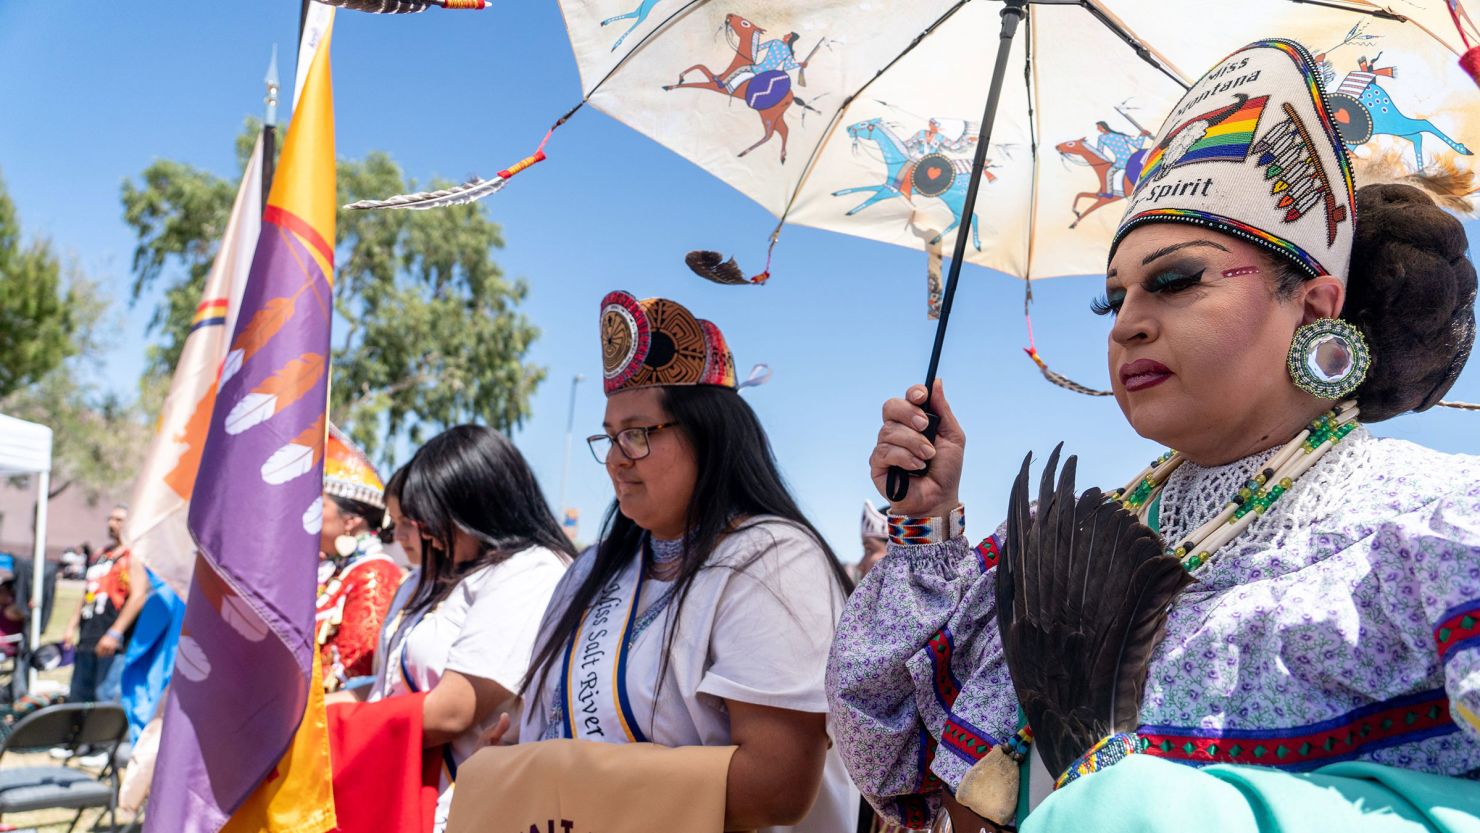 Miss Montana Two-Spirit Land Lakes, of the Chickasaw Tribe, right, attends the 3rd Annual Two Spirit Powwow at South Mountain Community College in Phoenix on April 15, 2023.